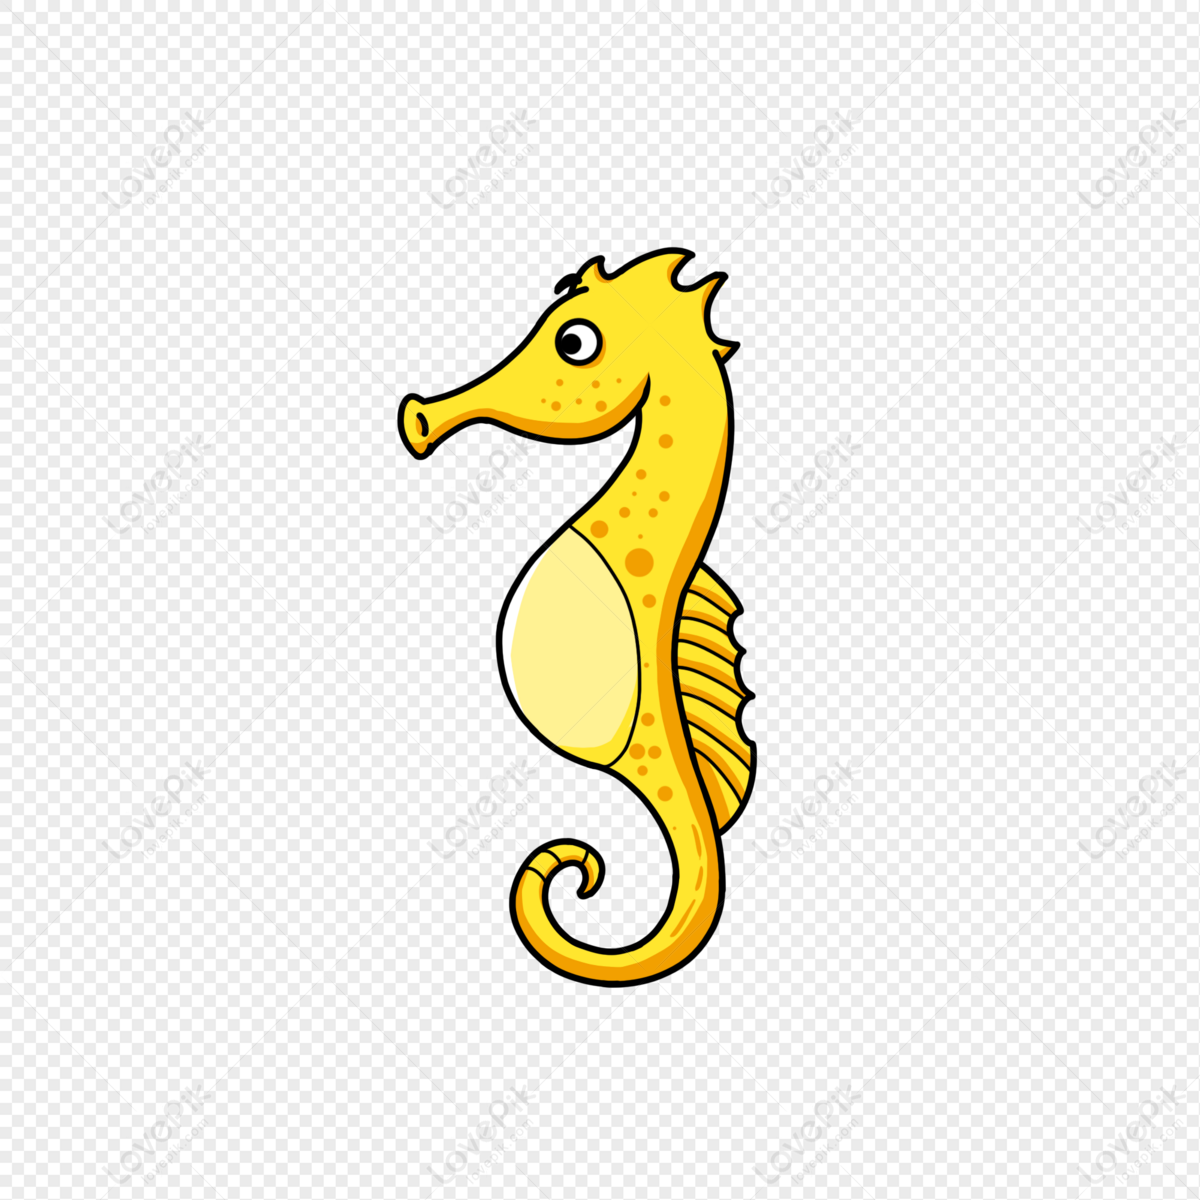 Cartoon Seahorse PNG Picture And Clipart Image For Free Download - Lovepik  | 401389845